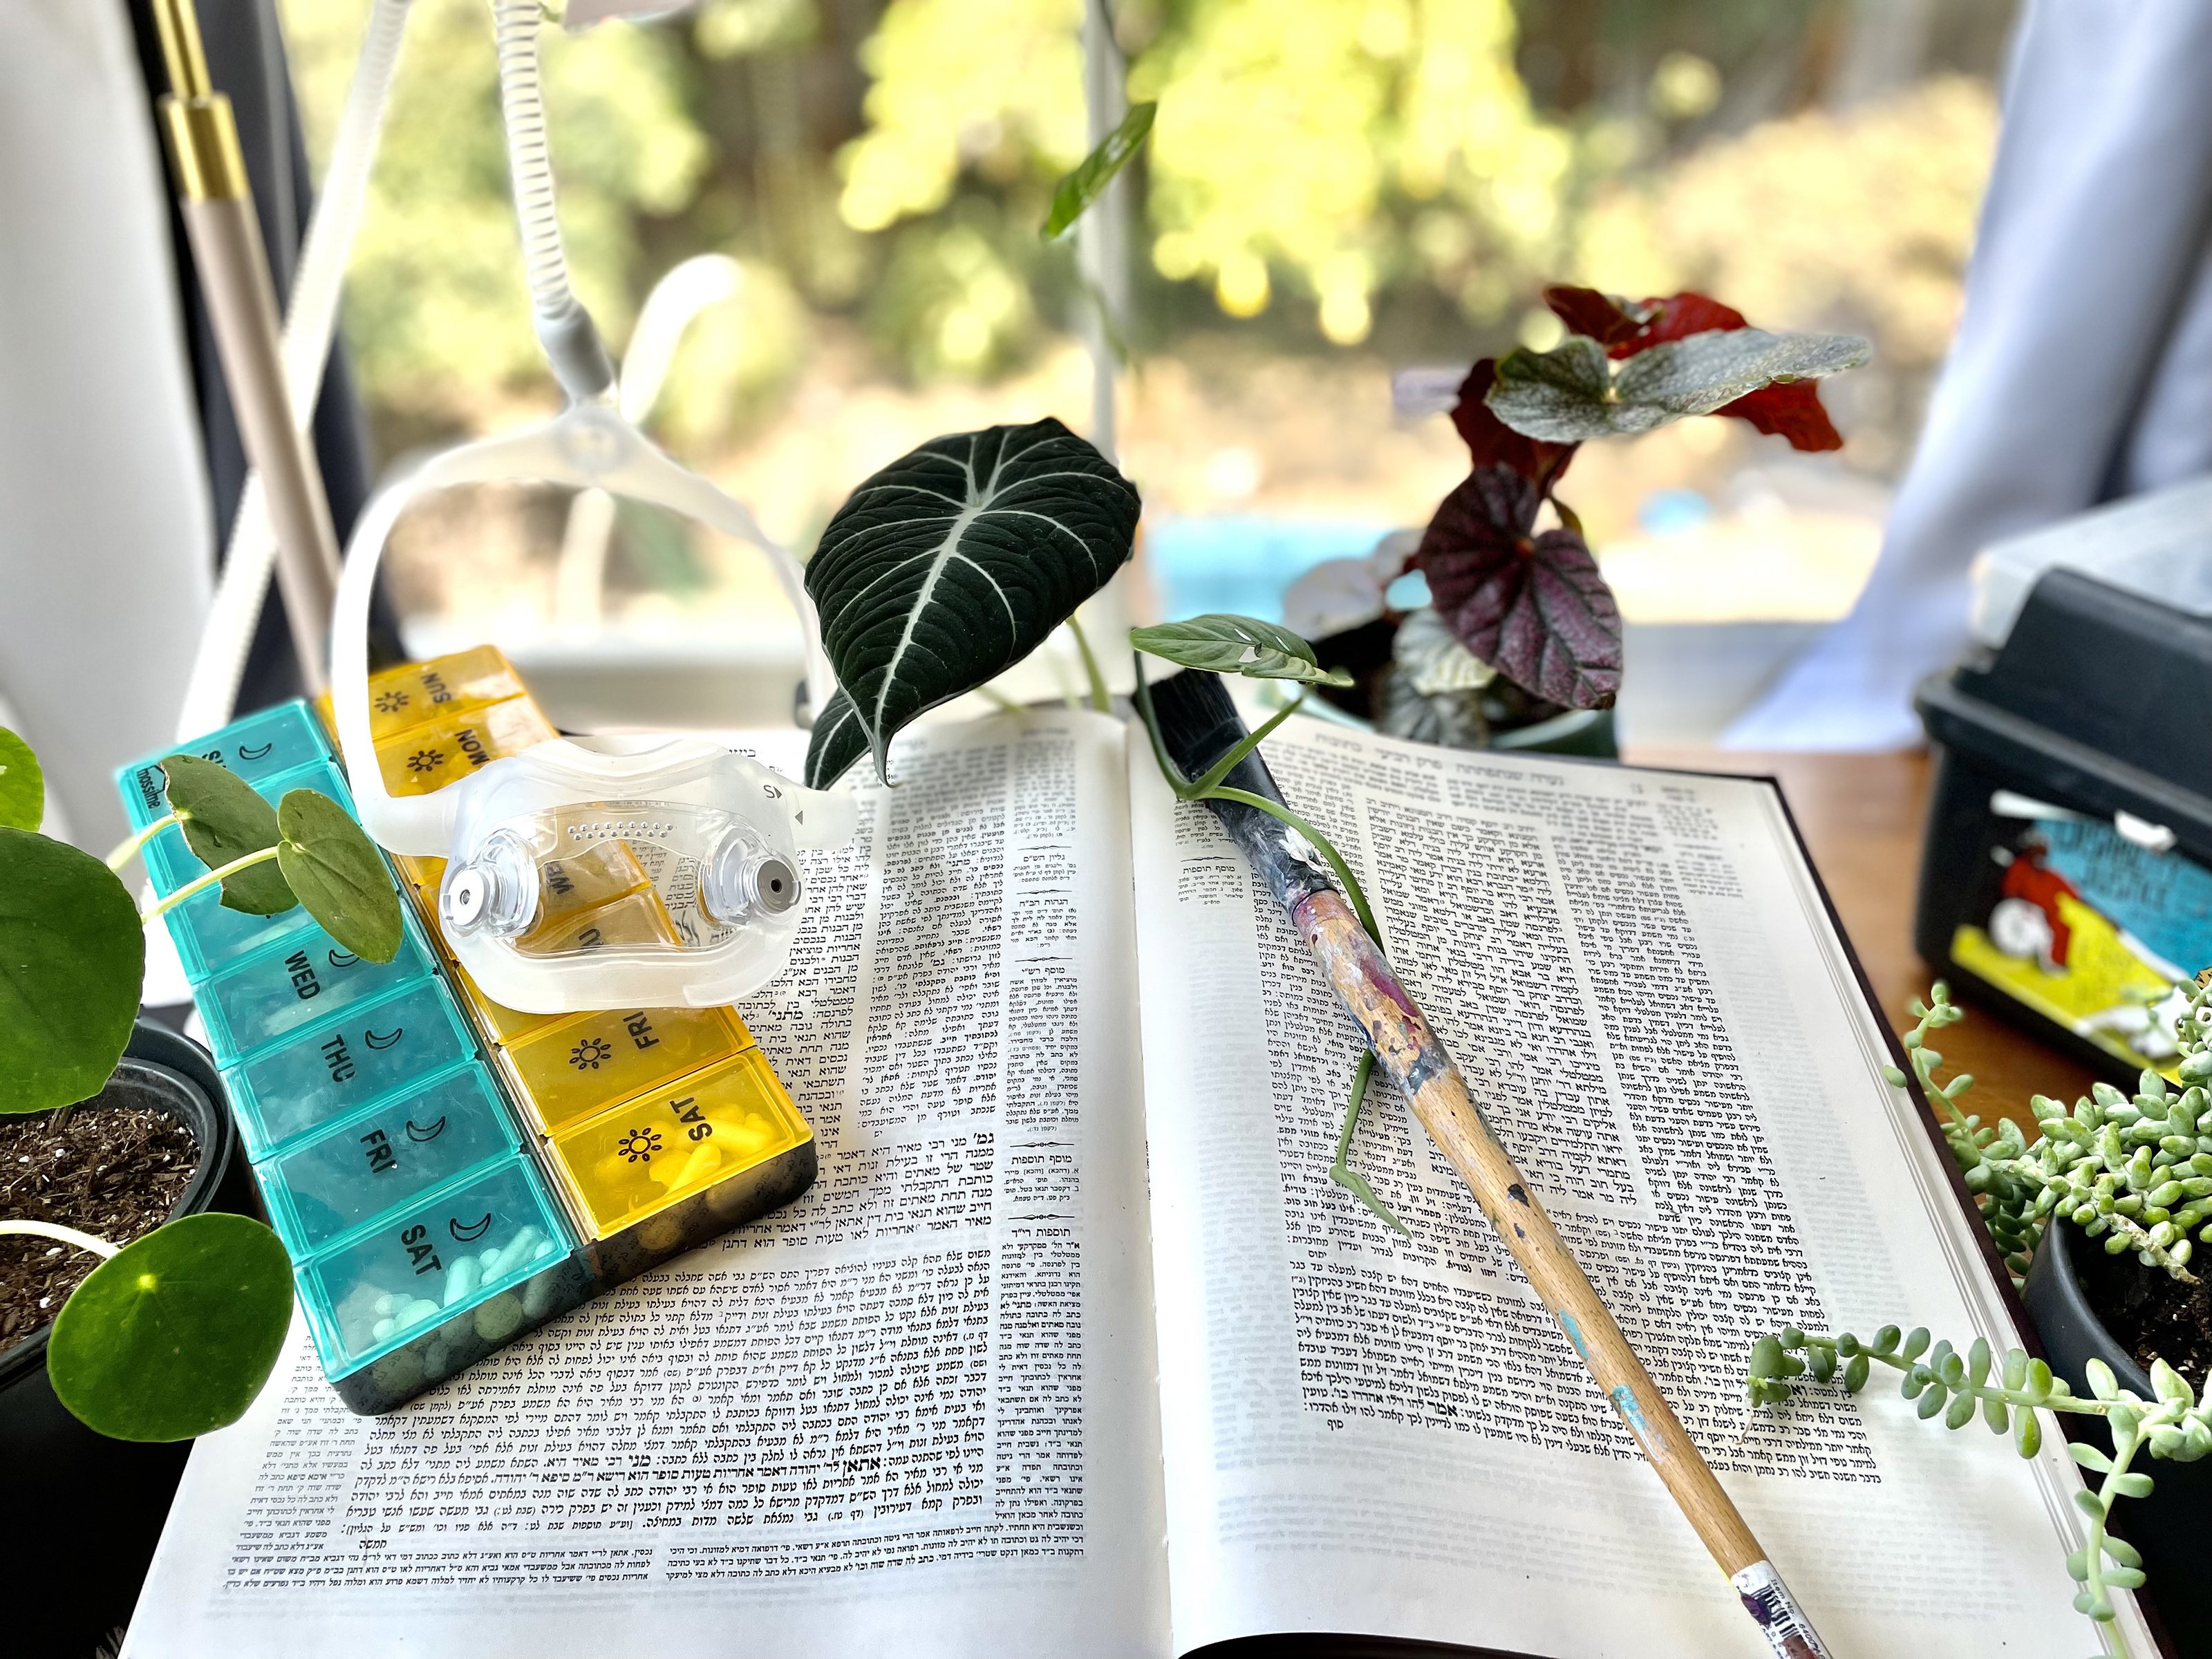 A Chumash (or printed and bound Hebrew Bible) lays open. A paint brush sits on the right side, and a pill organizer case and respirator sit on the other. Houseplants droop their leaves over the open pages of the book.